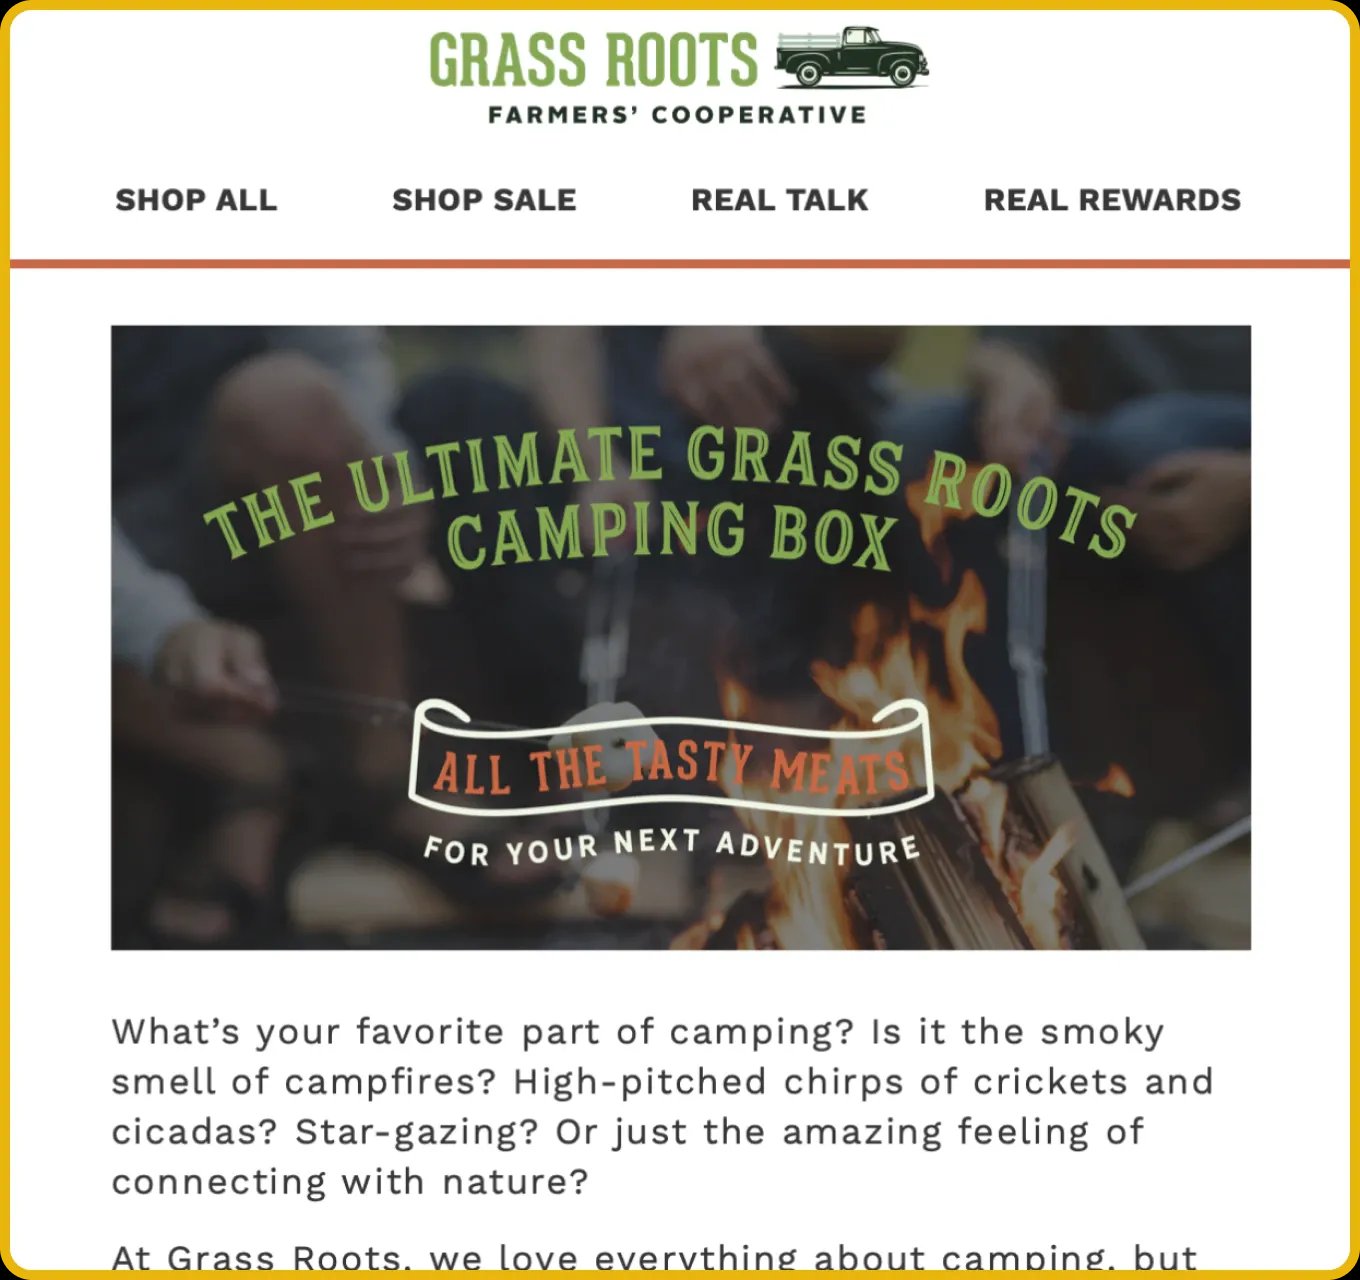 Image of Grass Roots webpage.